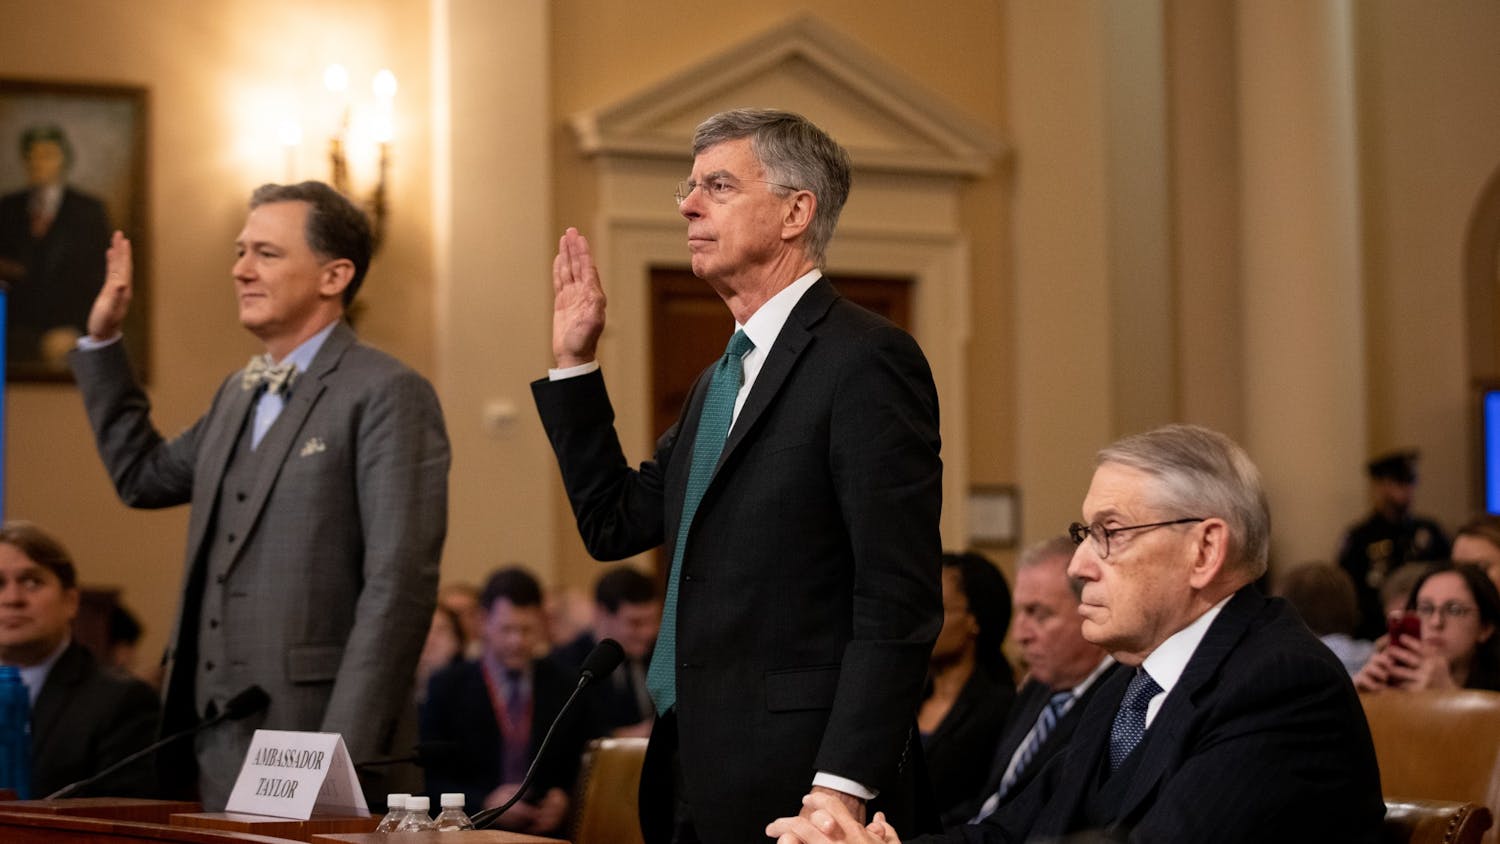 Deputy Assistant Secretary for European and Eurasian Affairs George Kent, left, and William B. Taylor, right, swear in to the House Intelligence Committee&#x27;s first public inquiry into the interaction between President Donald Trump and the government of Ukraine on Nov. 13 at the U.S. Capitol in Washington, D.C. 